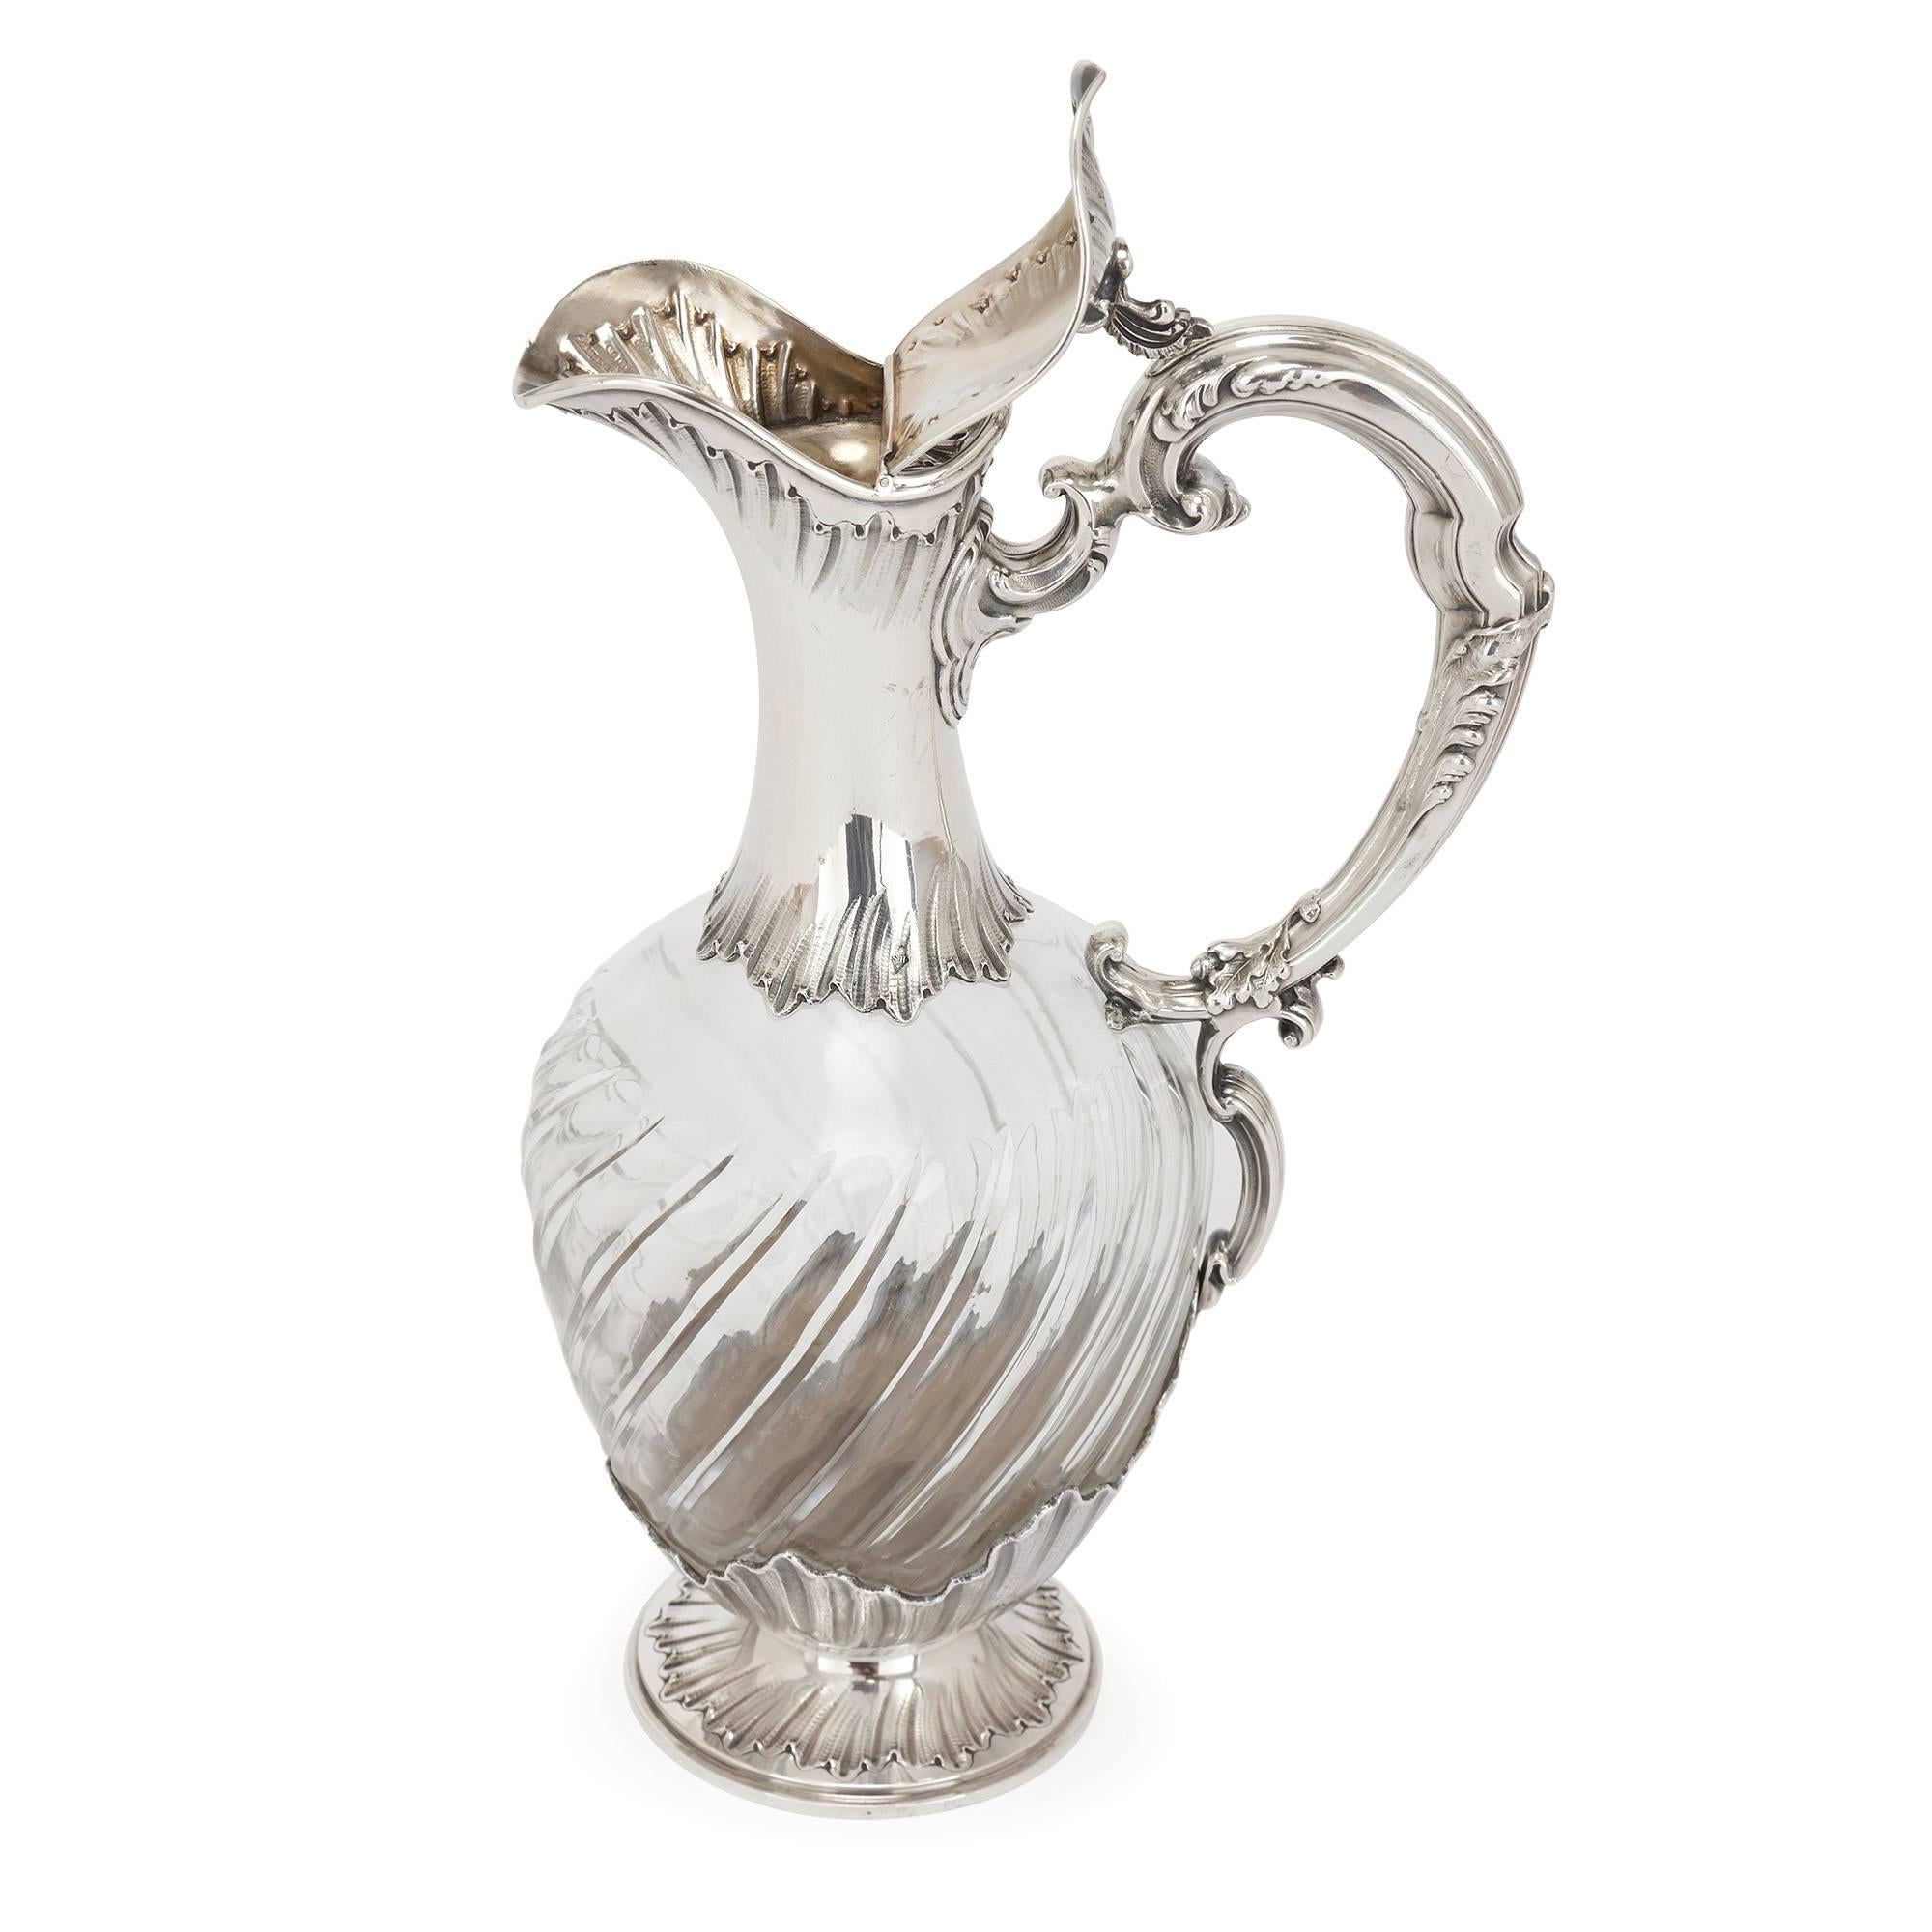 Belle Époque Pair of 19th Century French Silver and Crystal Claret Jugs by Henri Soufflot